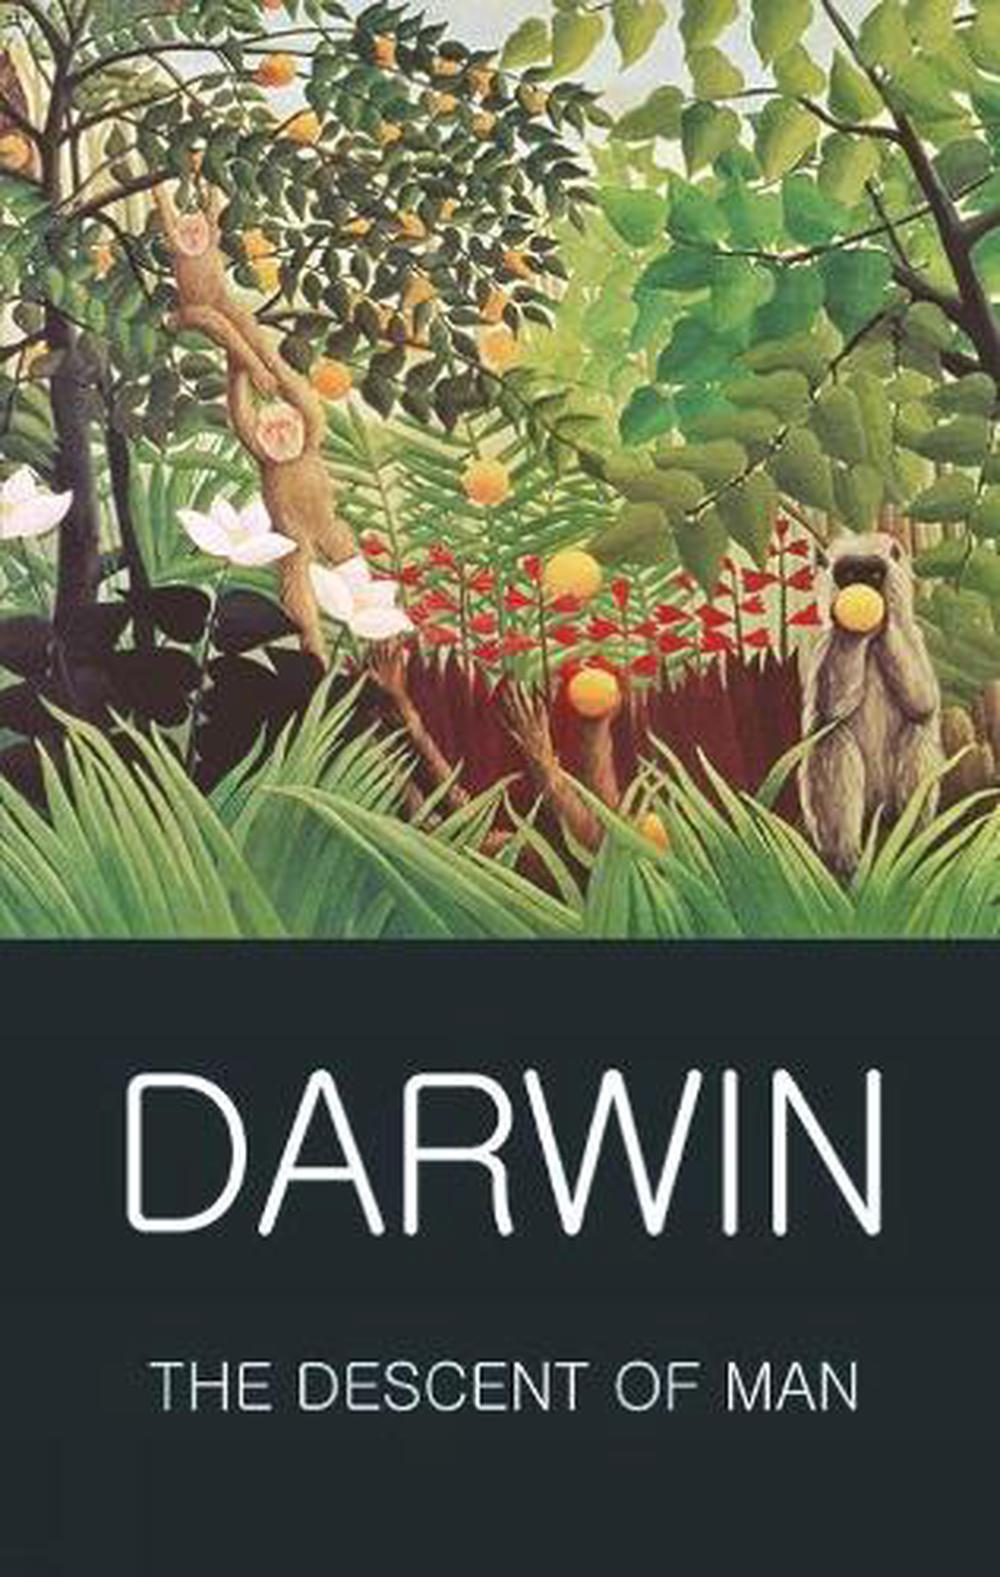 The Descent Of Man By Charles Darwin Paperback 9781840226980 Buy Online At The Nile 5441